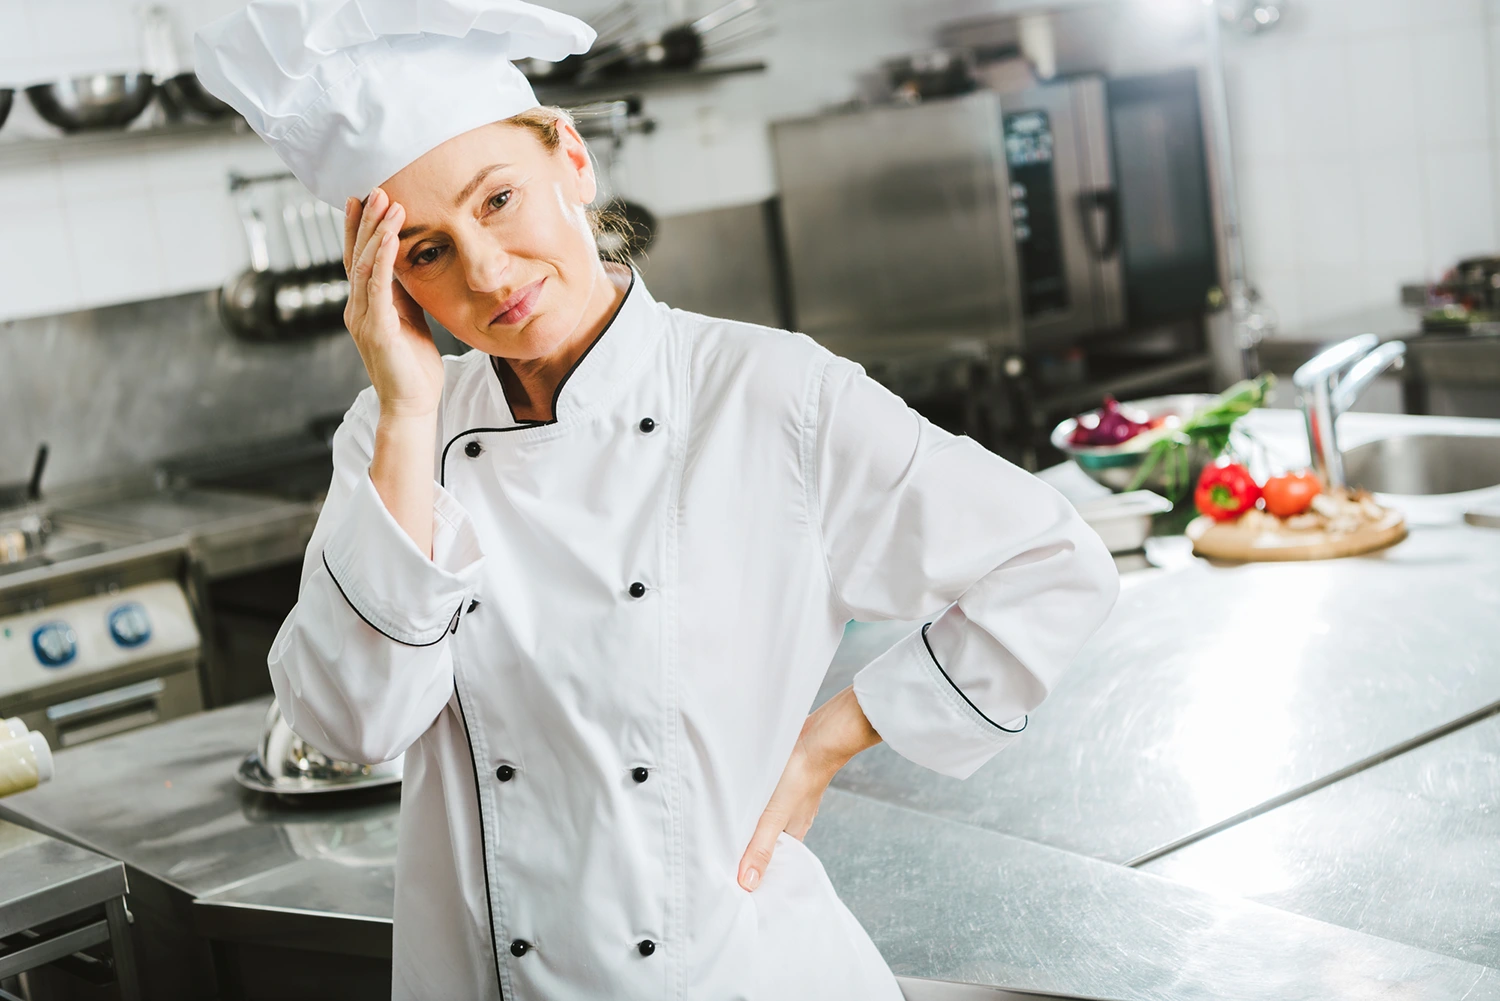 A woman in a chef's uniform is stressed, perhaps because she's diligently monitoring ingredient prices while keeping an eye on restaurant costs.